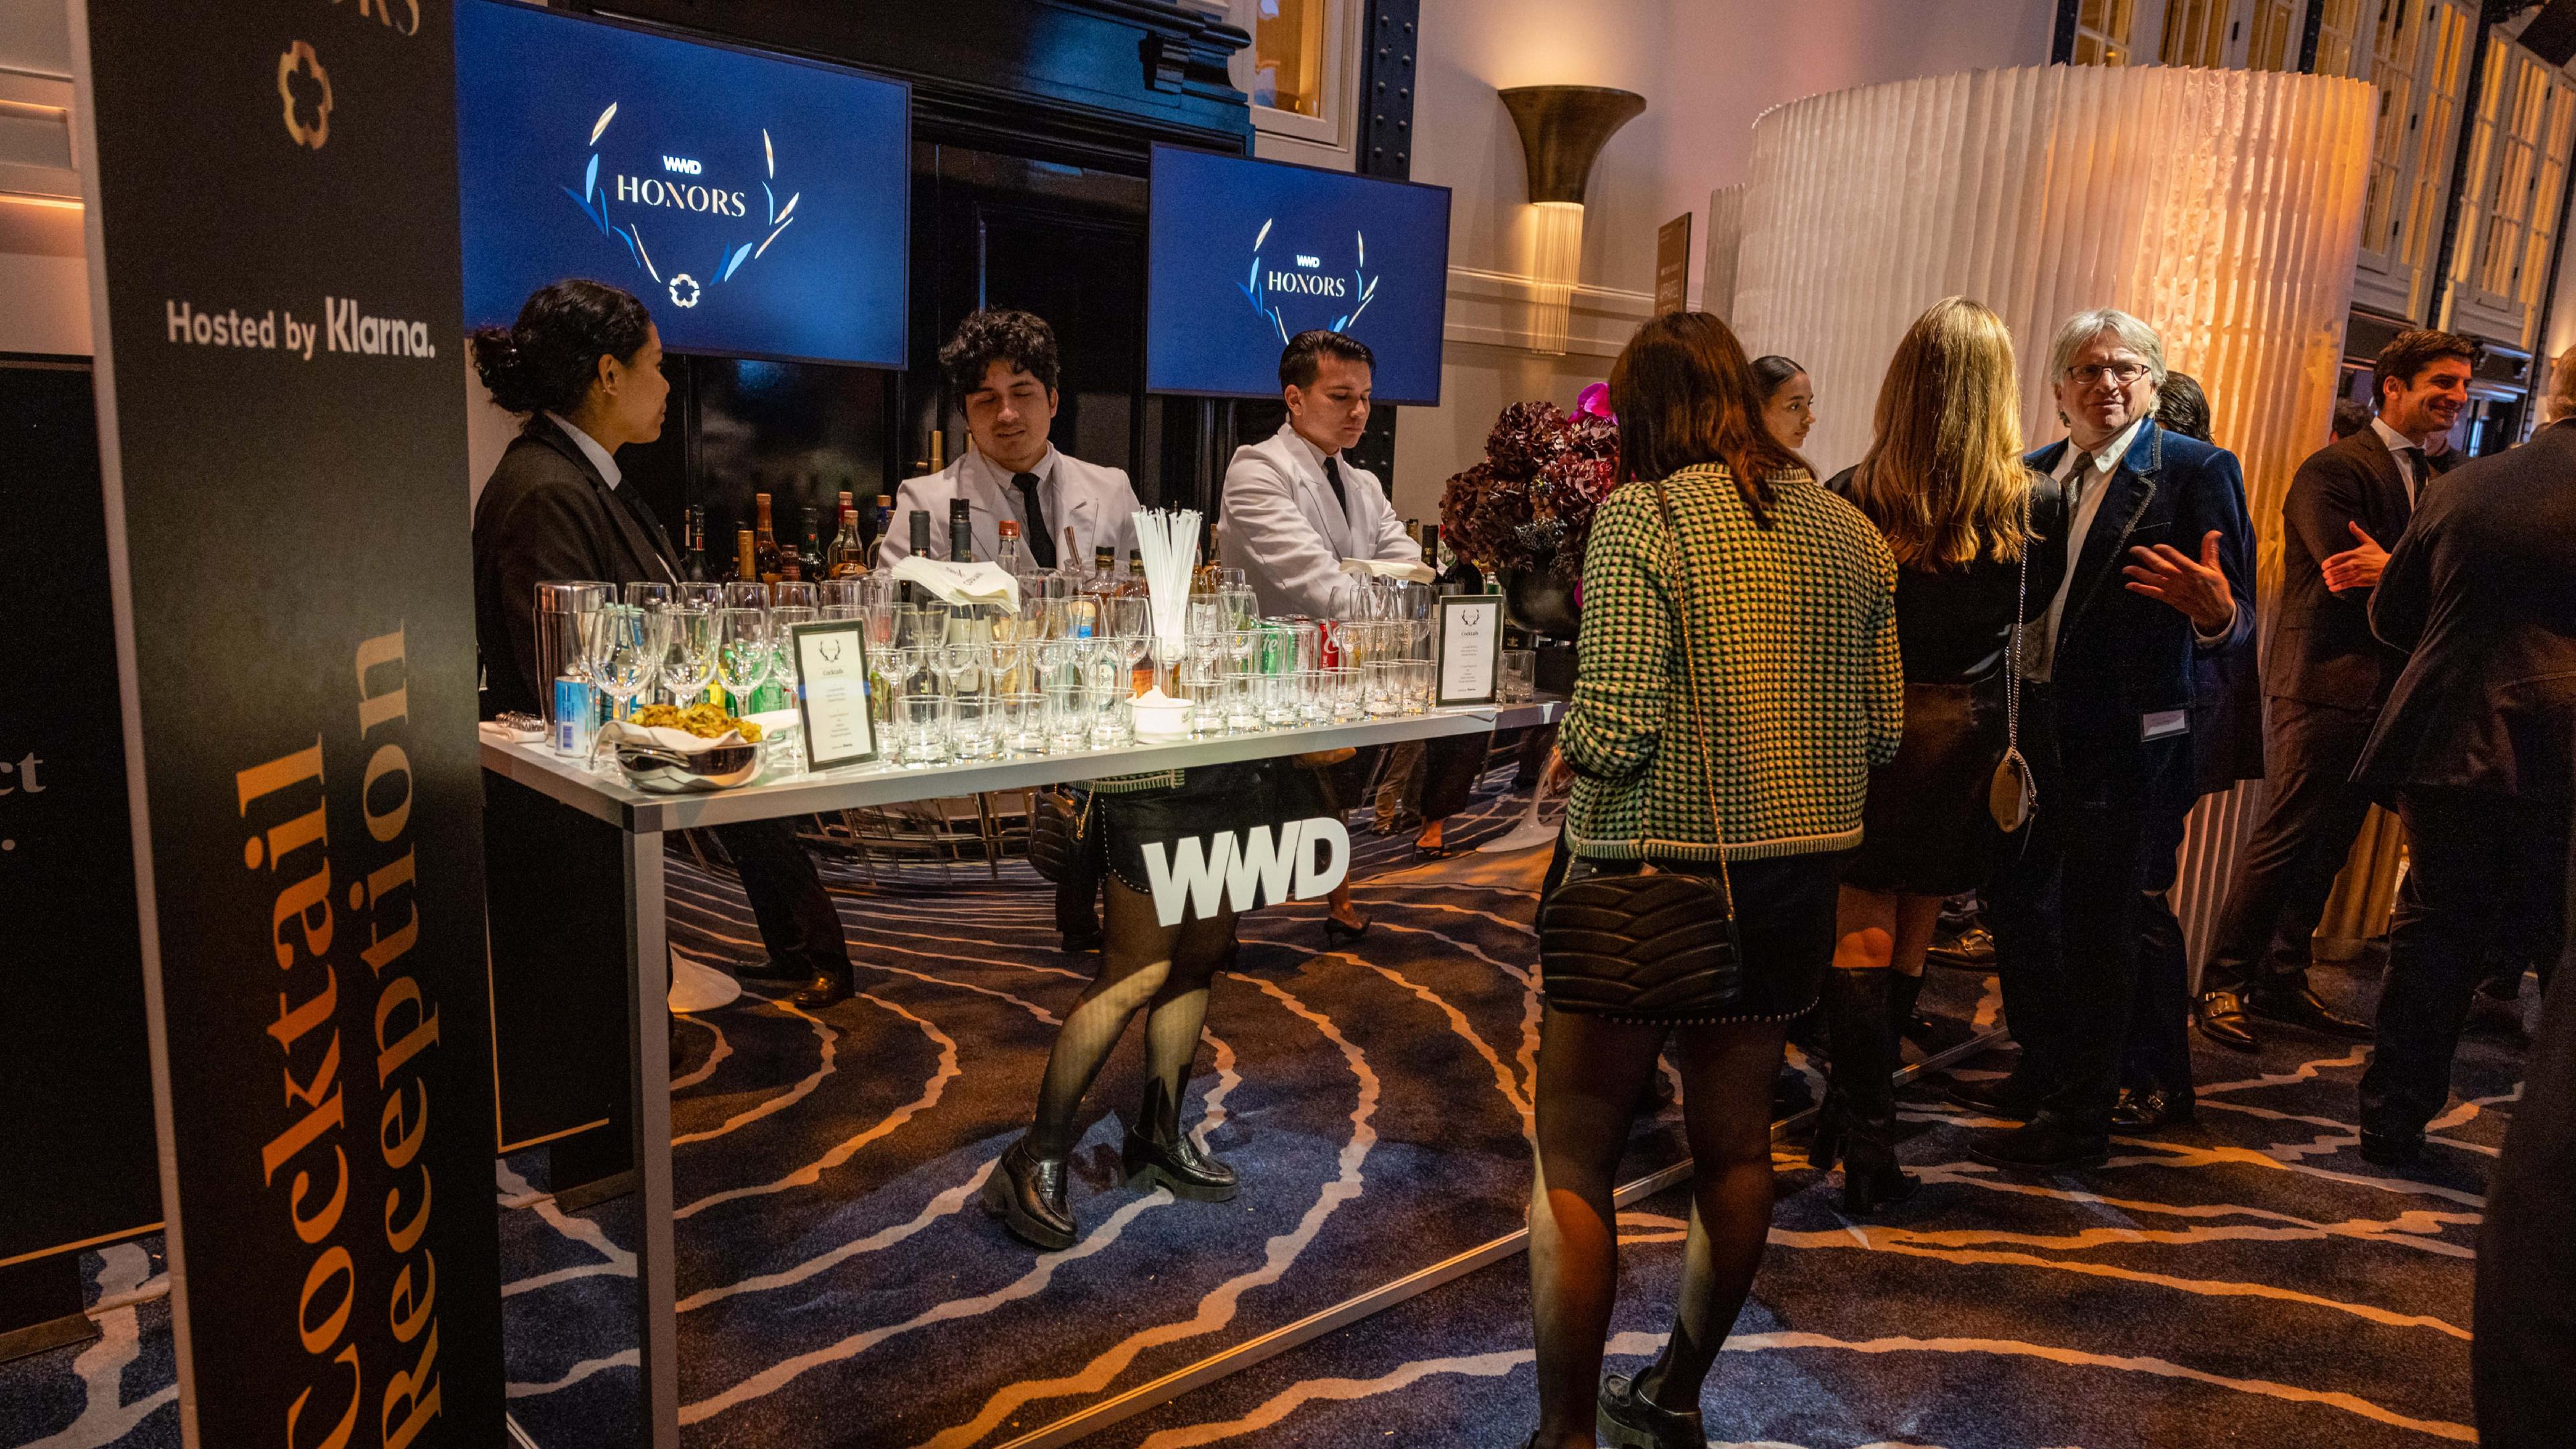 Bar at the WWD Honors event with branding on large totem signs